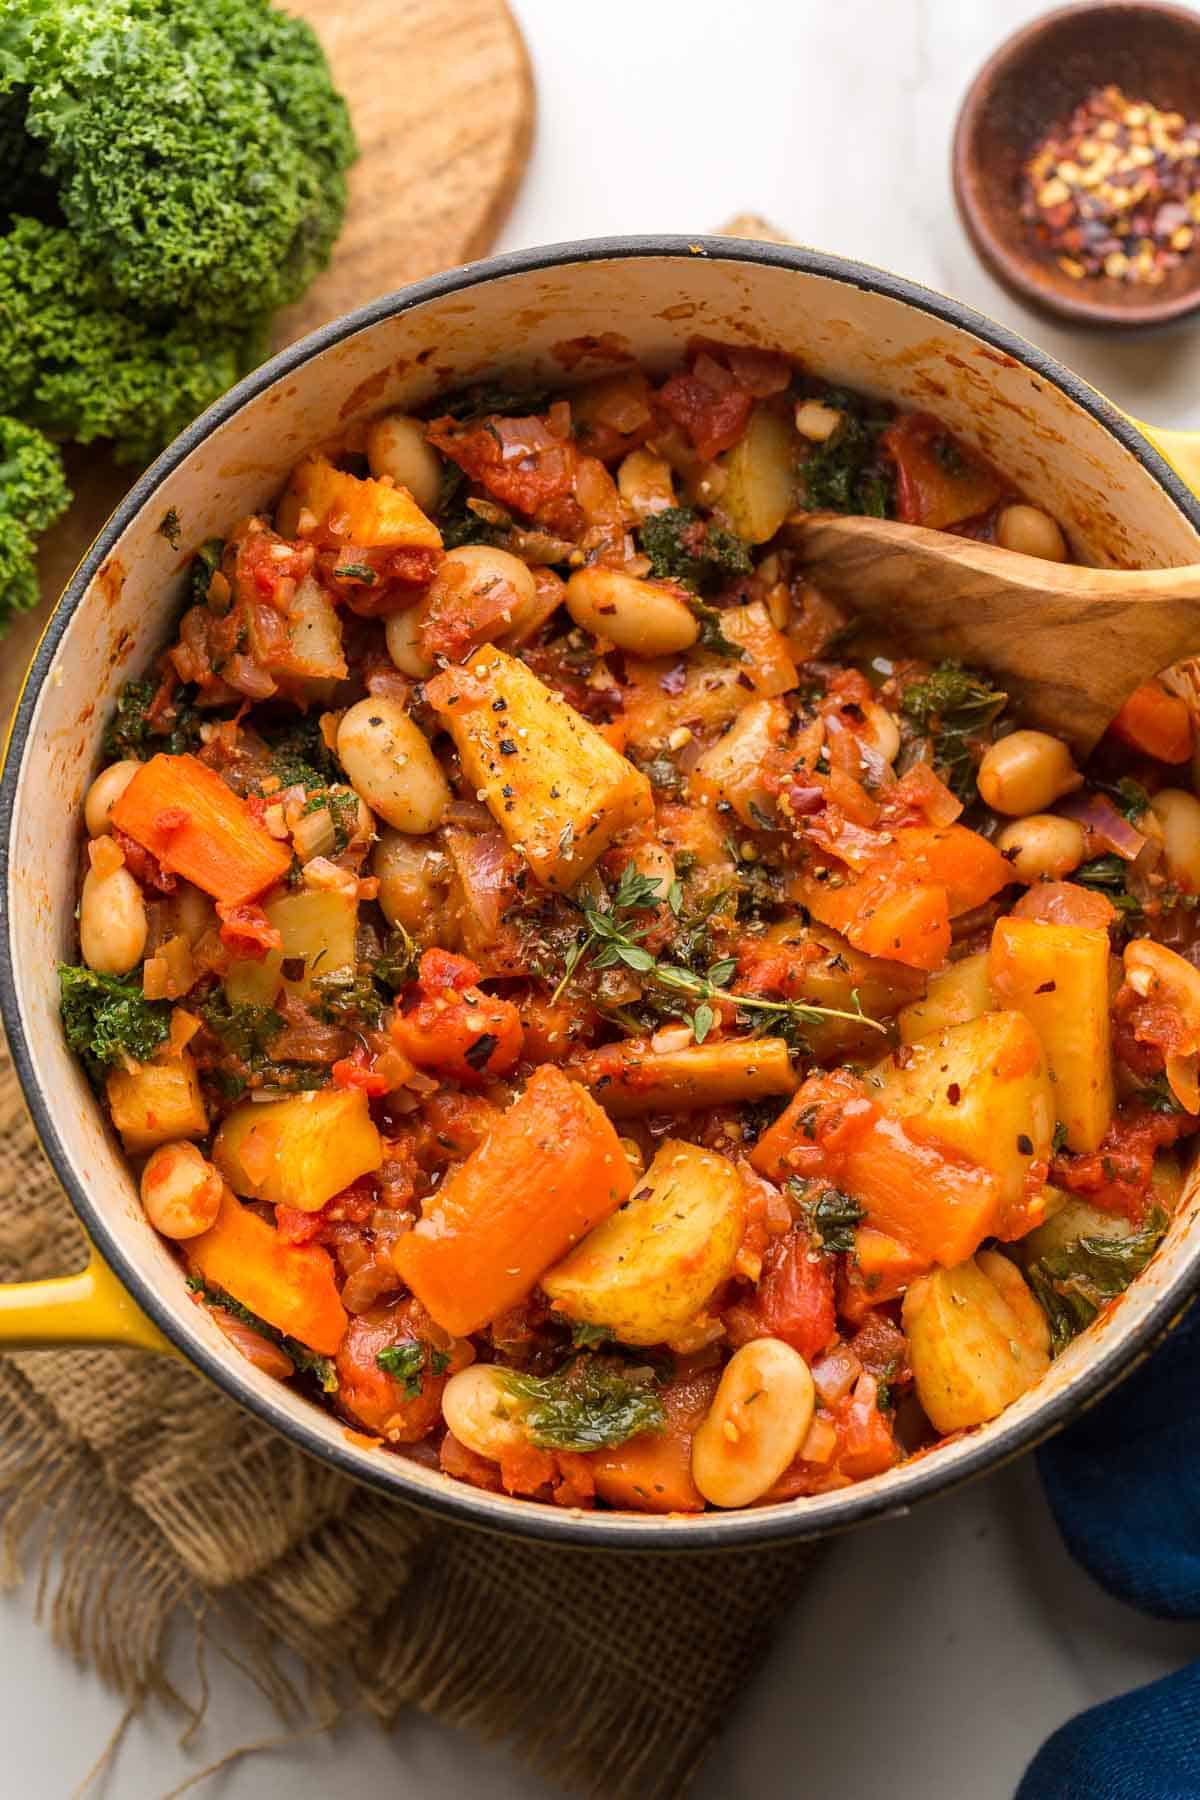 Roasted Root Vegetable Stew from https://www.asaucykitchen.com/